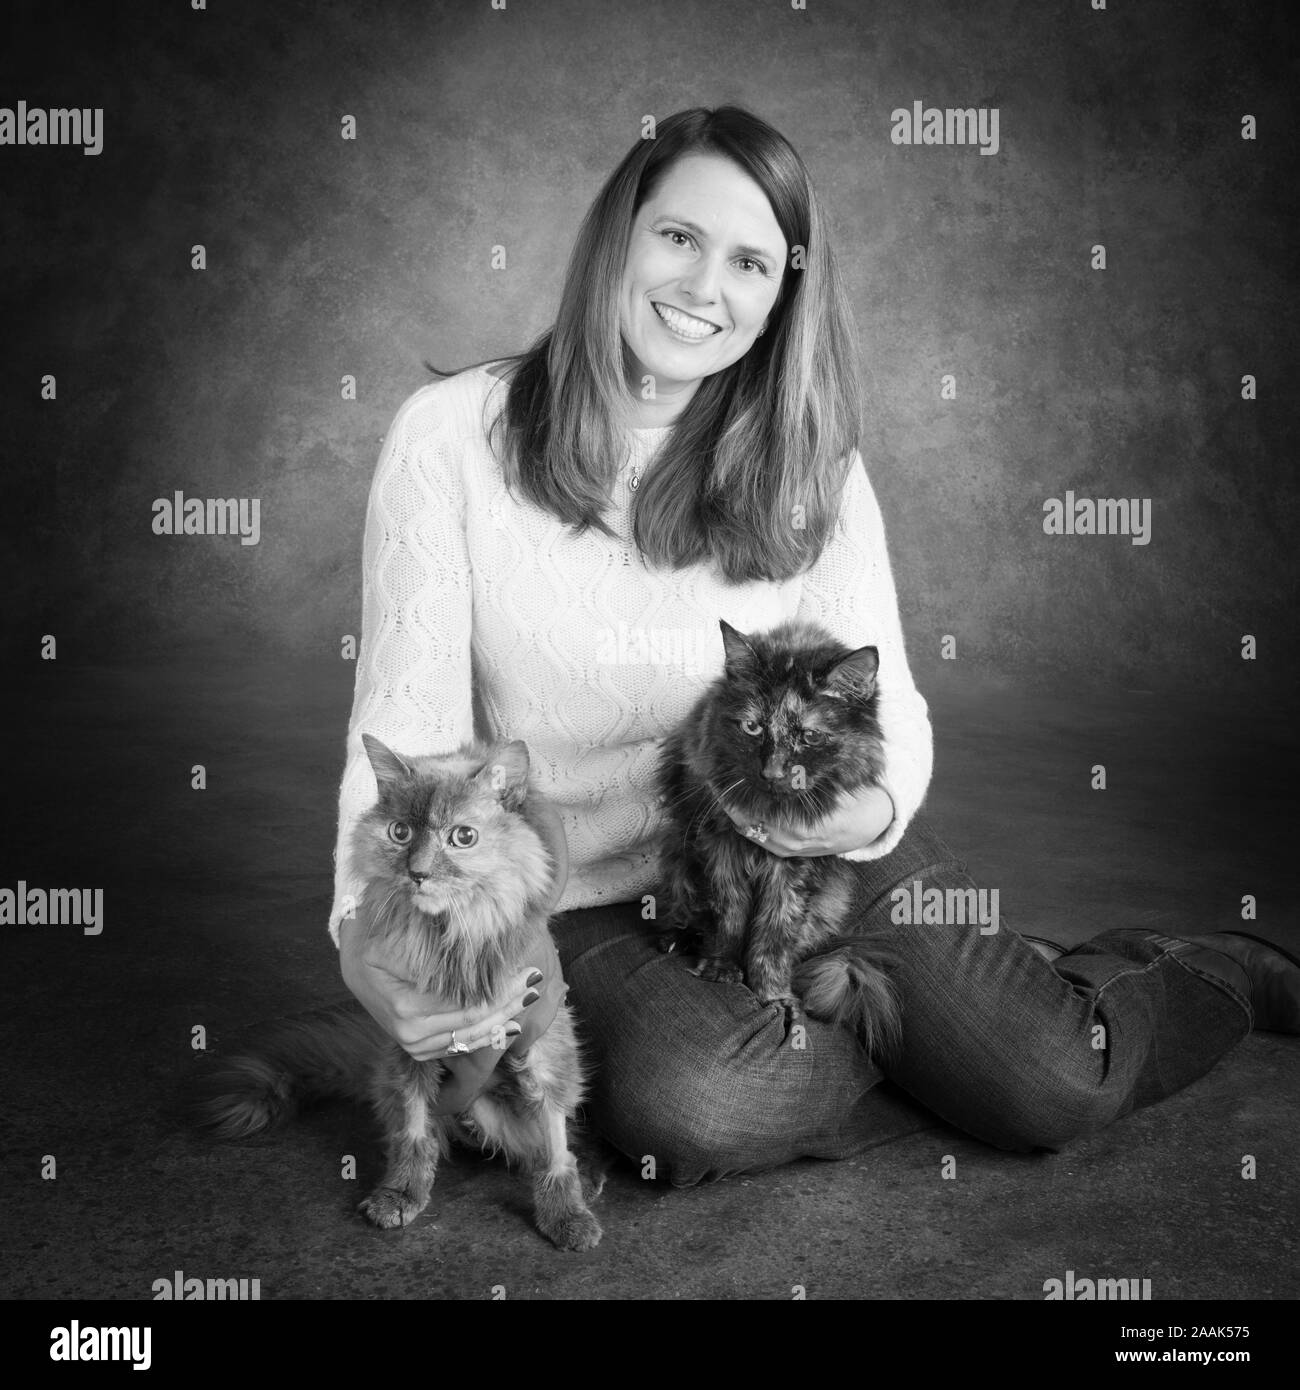 Studio portrait of smiling woman with two long haired cats Stock Photo